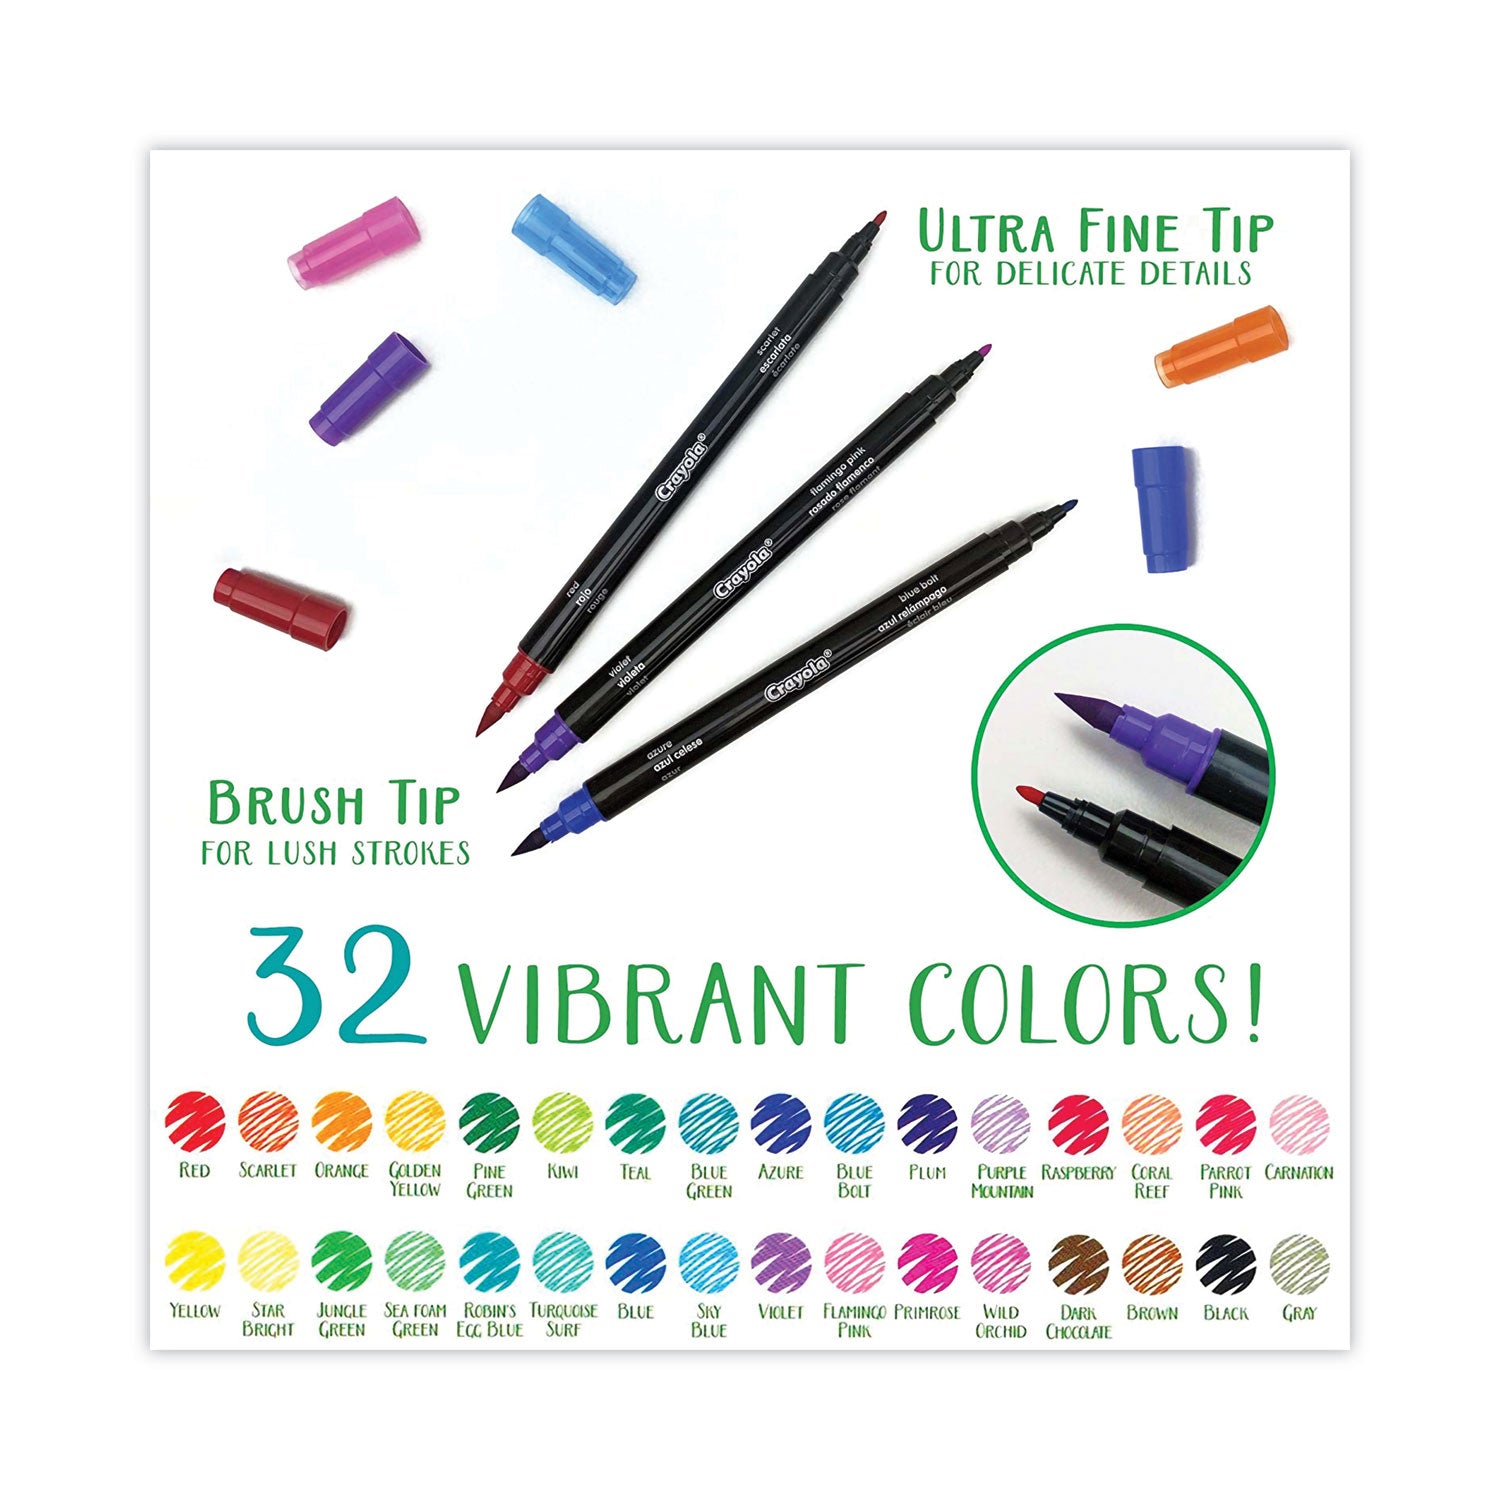 brush-and-detail-dual-ended-markers-extra-fine-brush-bullet-tips-assorted-colors-16-set_cyo586501 - 7